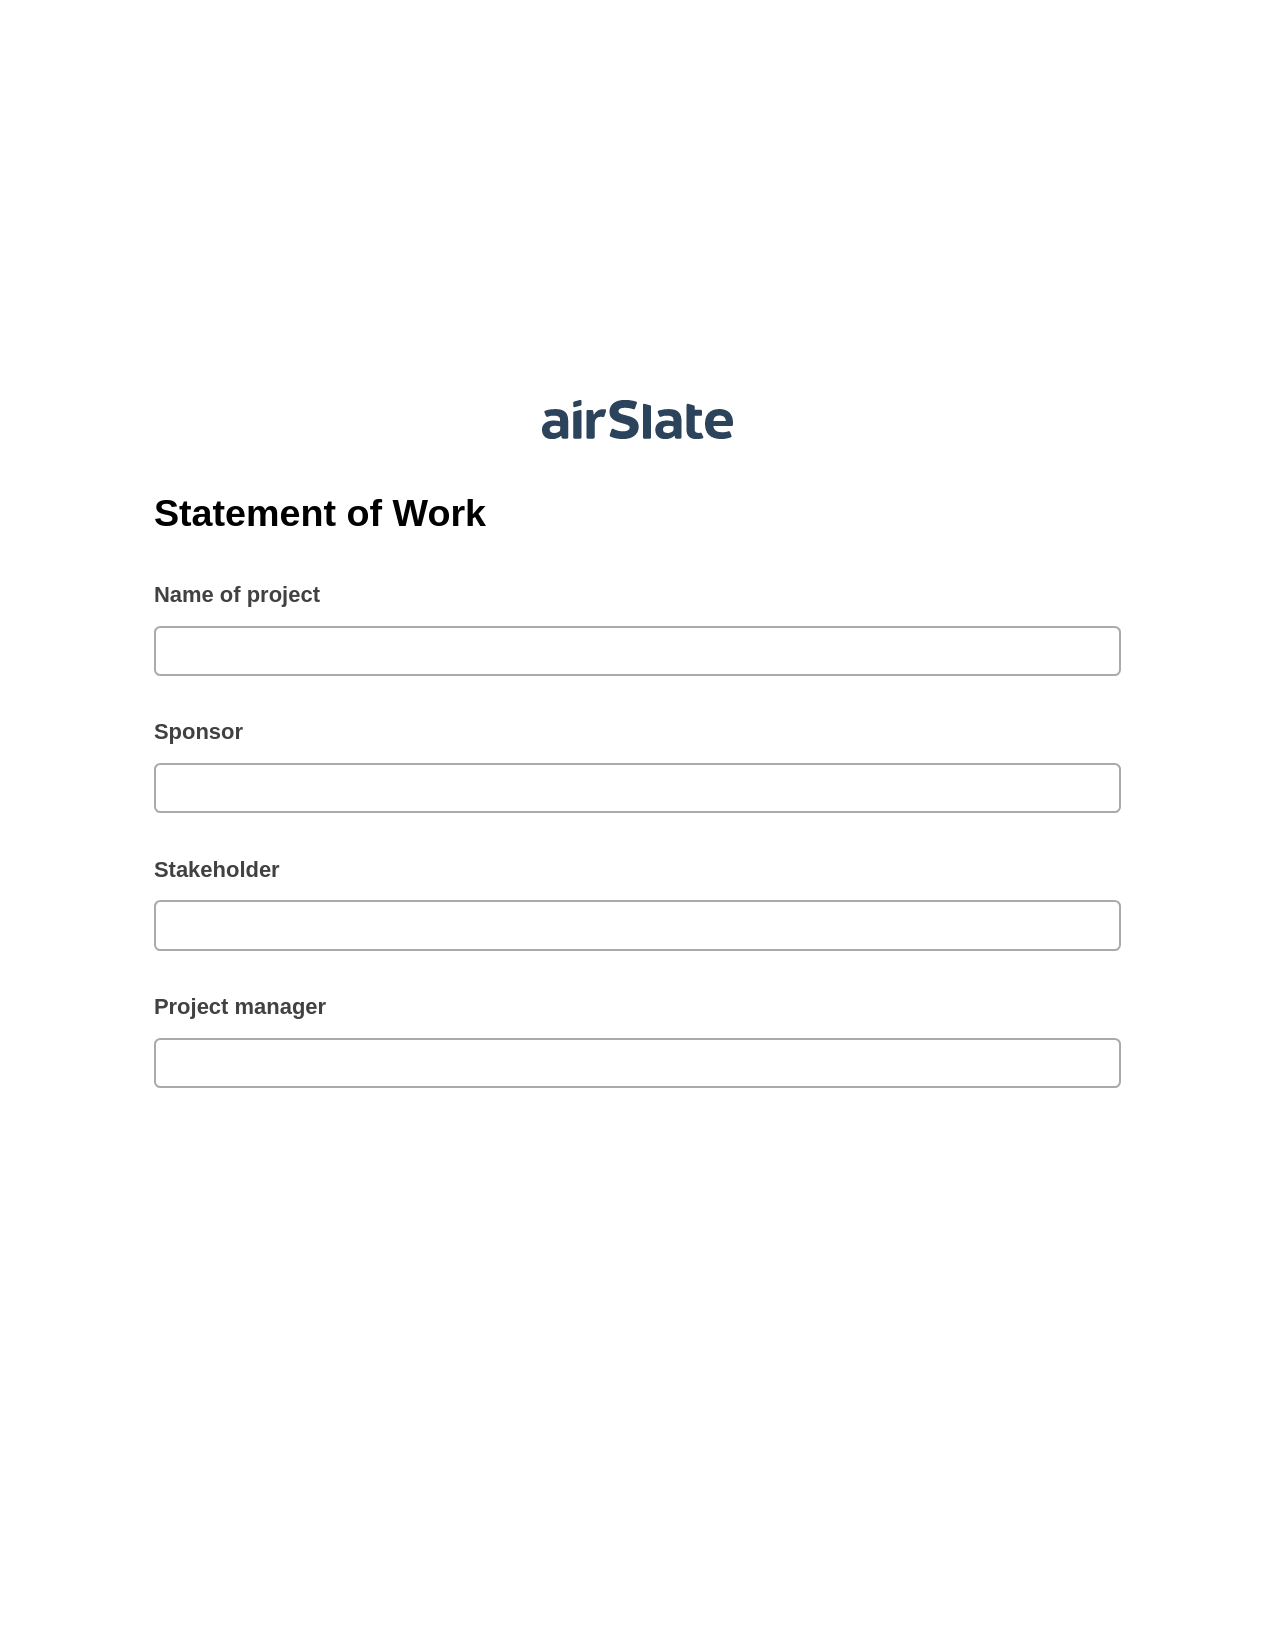 Statement of Work Pre-fill from CSV File Dropdown Options Bot, Create slate bot, OneDrive Bot